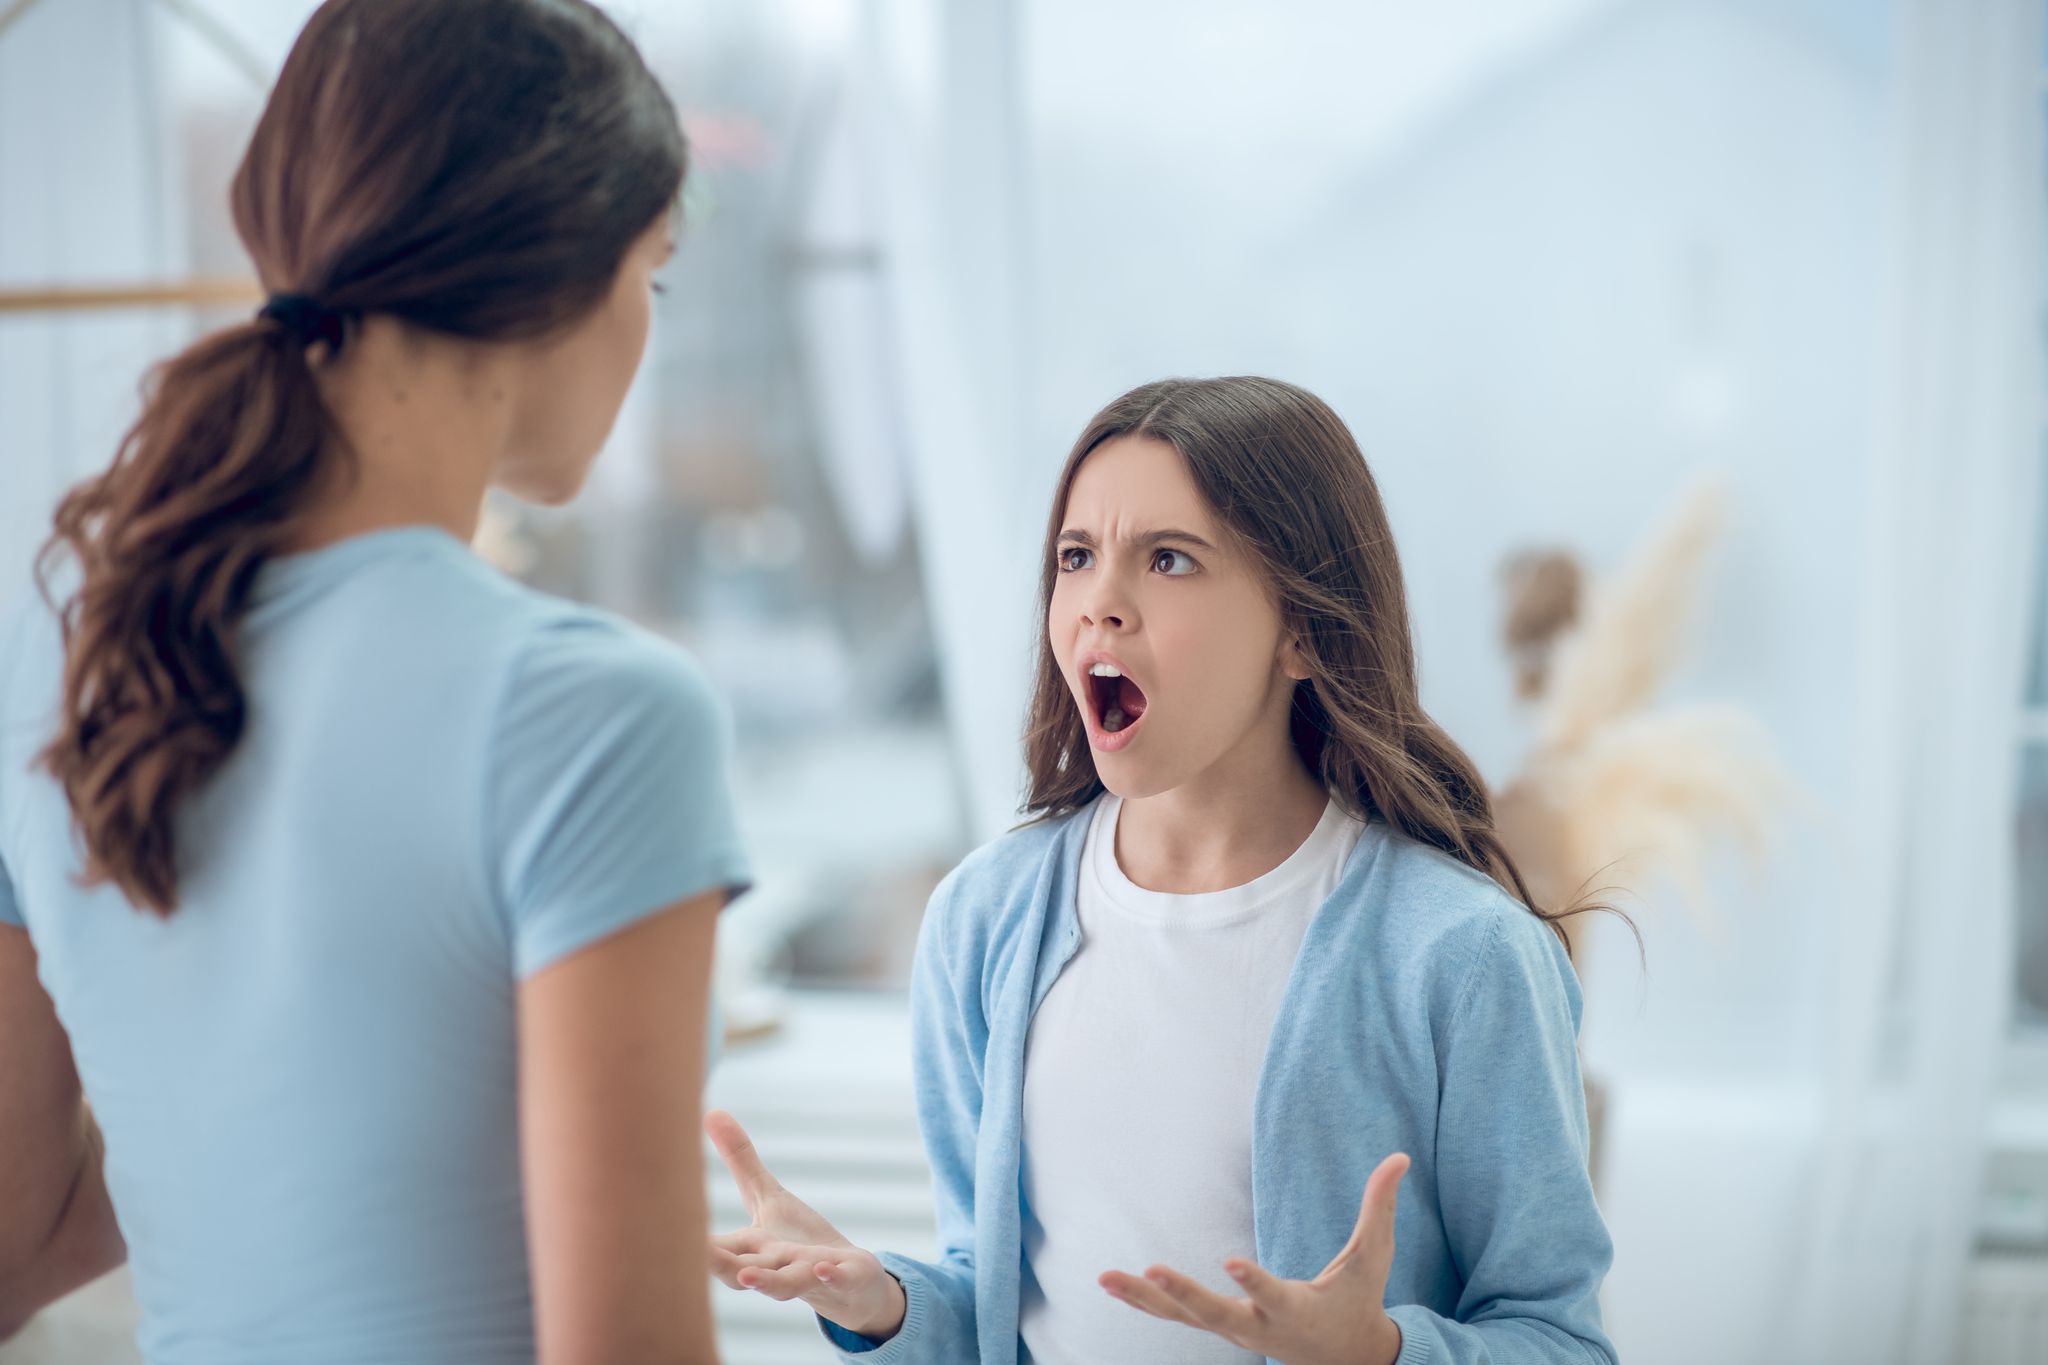 A little girl screaming at her mother | Source: Getty Images